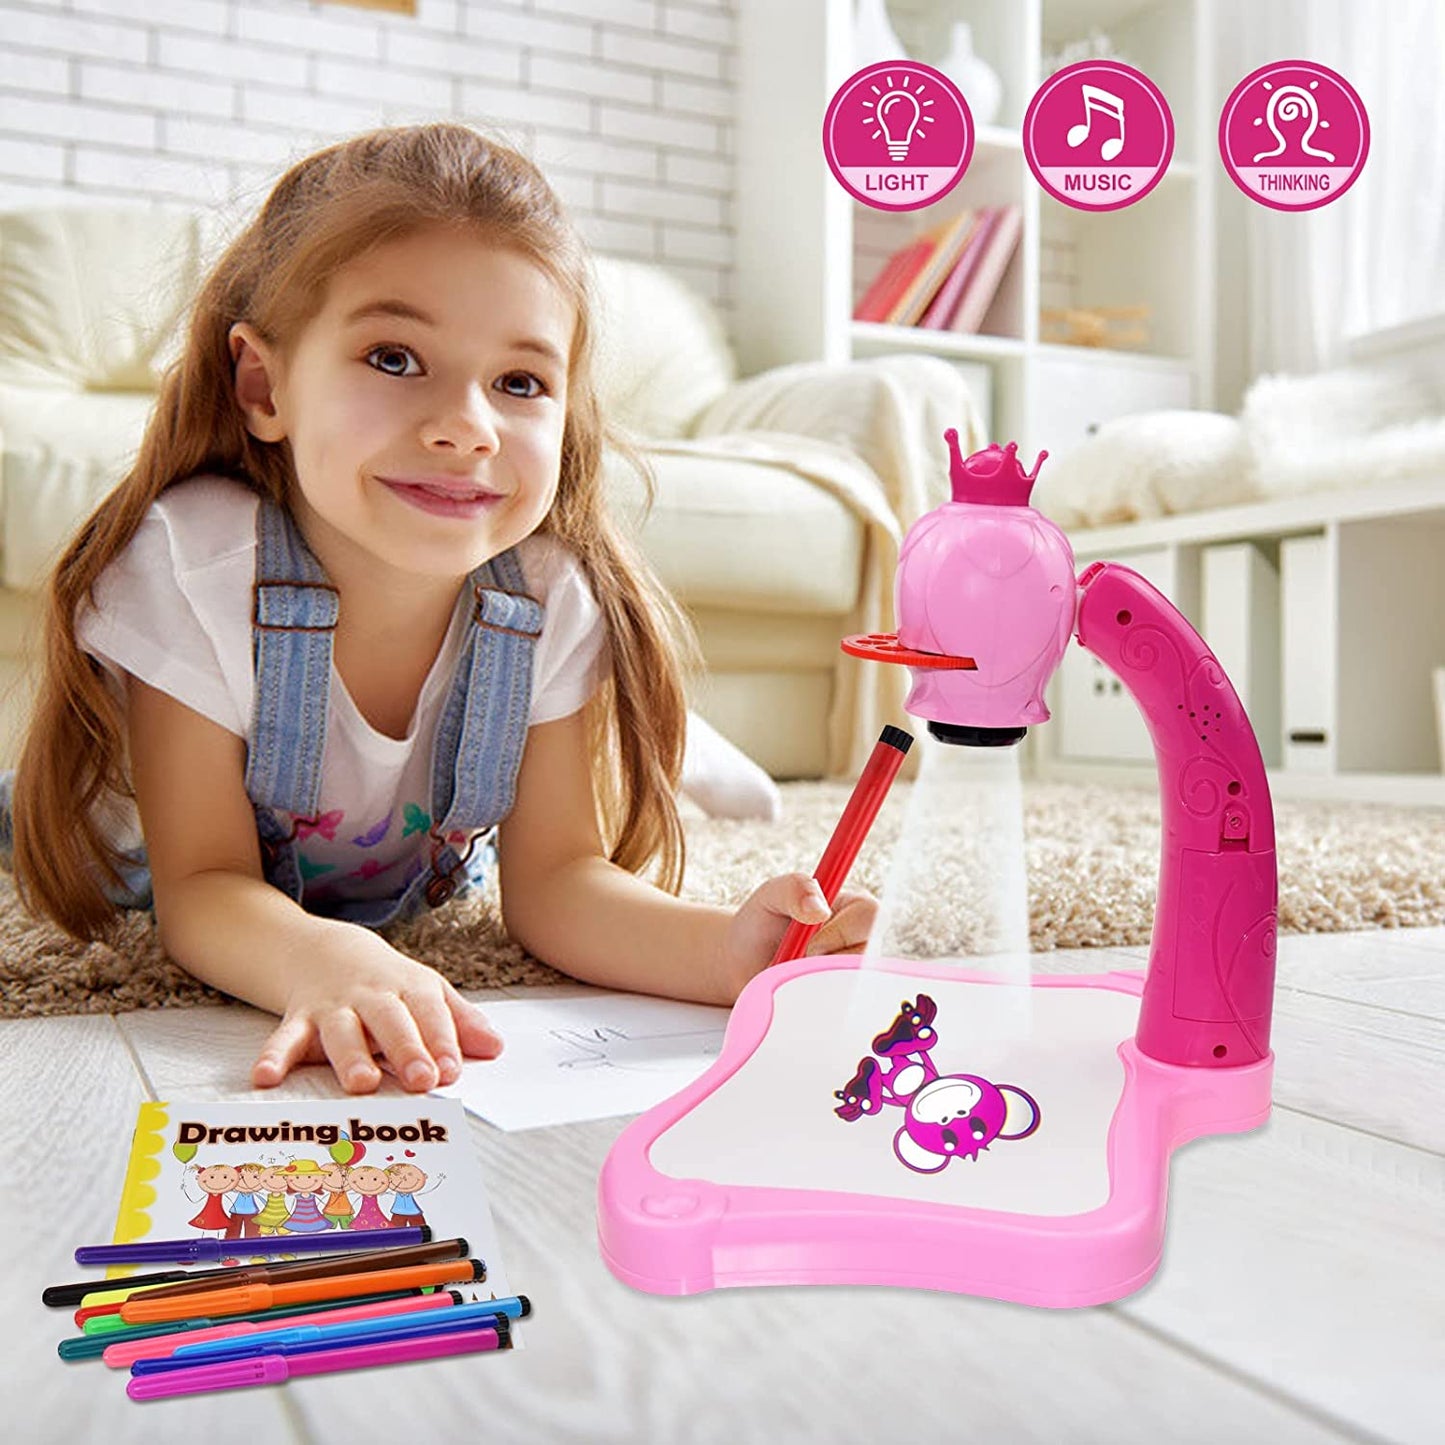 MM Toys Drawing Projector Painting Trace And Draw Desk for Kids - Artistic Skill Development, 12 Sketch Pens, 24 Designs, 4-10 Years - Pink